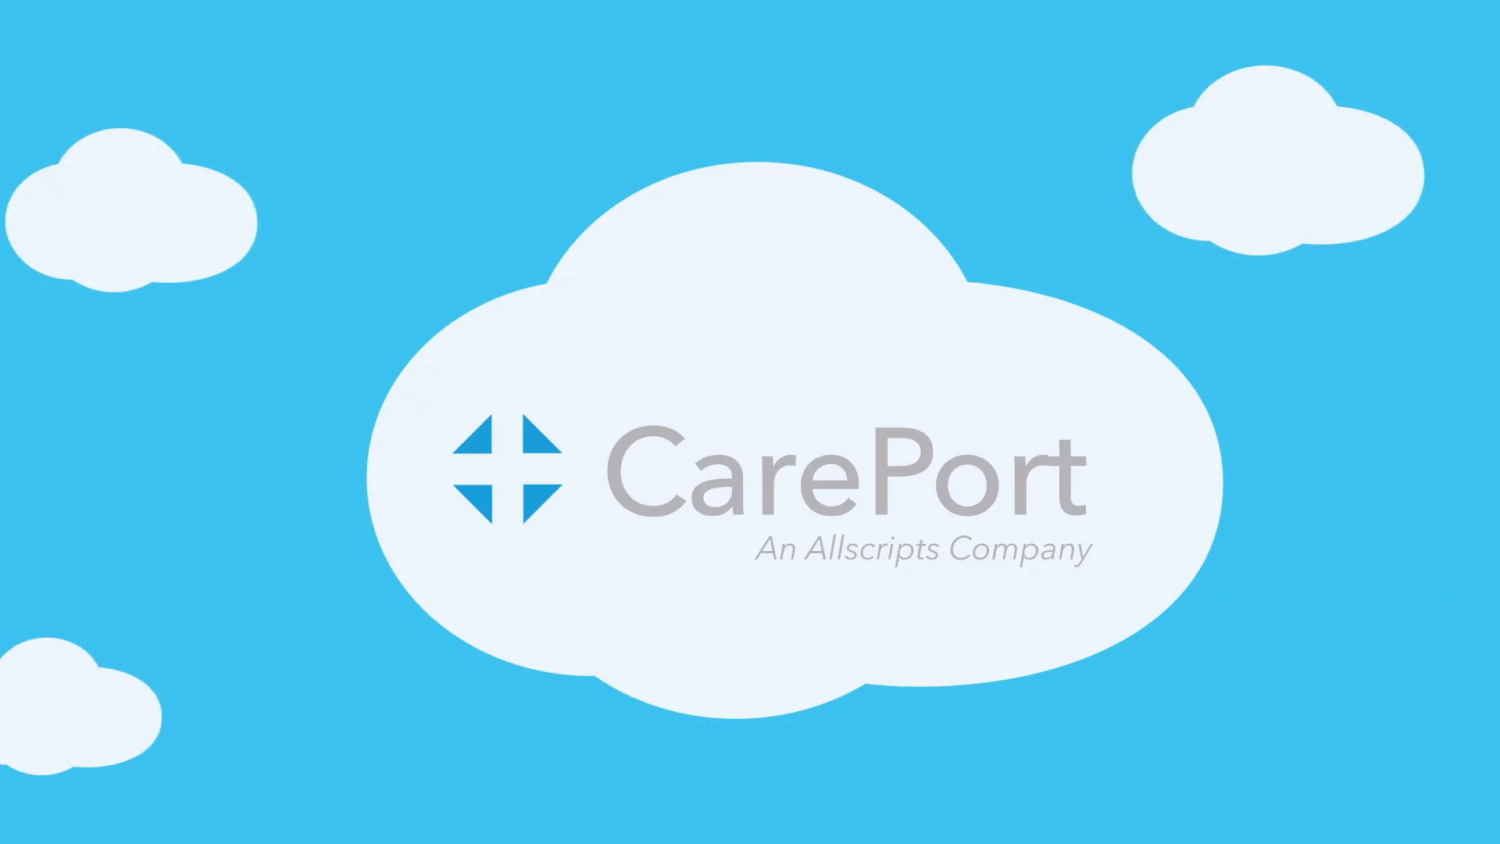 WellSky Acquires CarePort Health from Allscripts for $1.35B